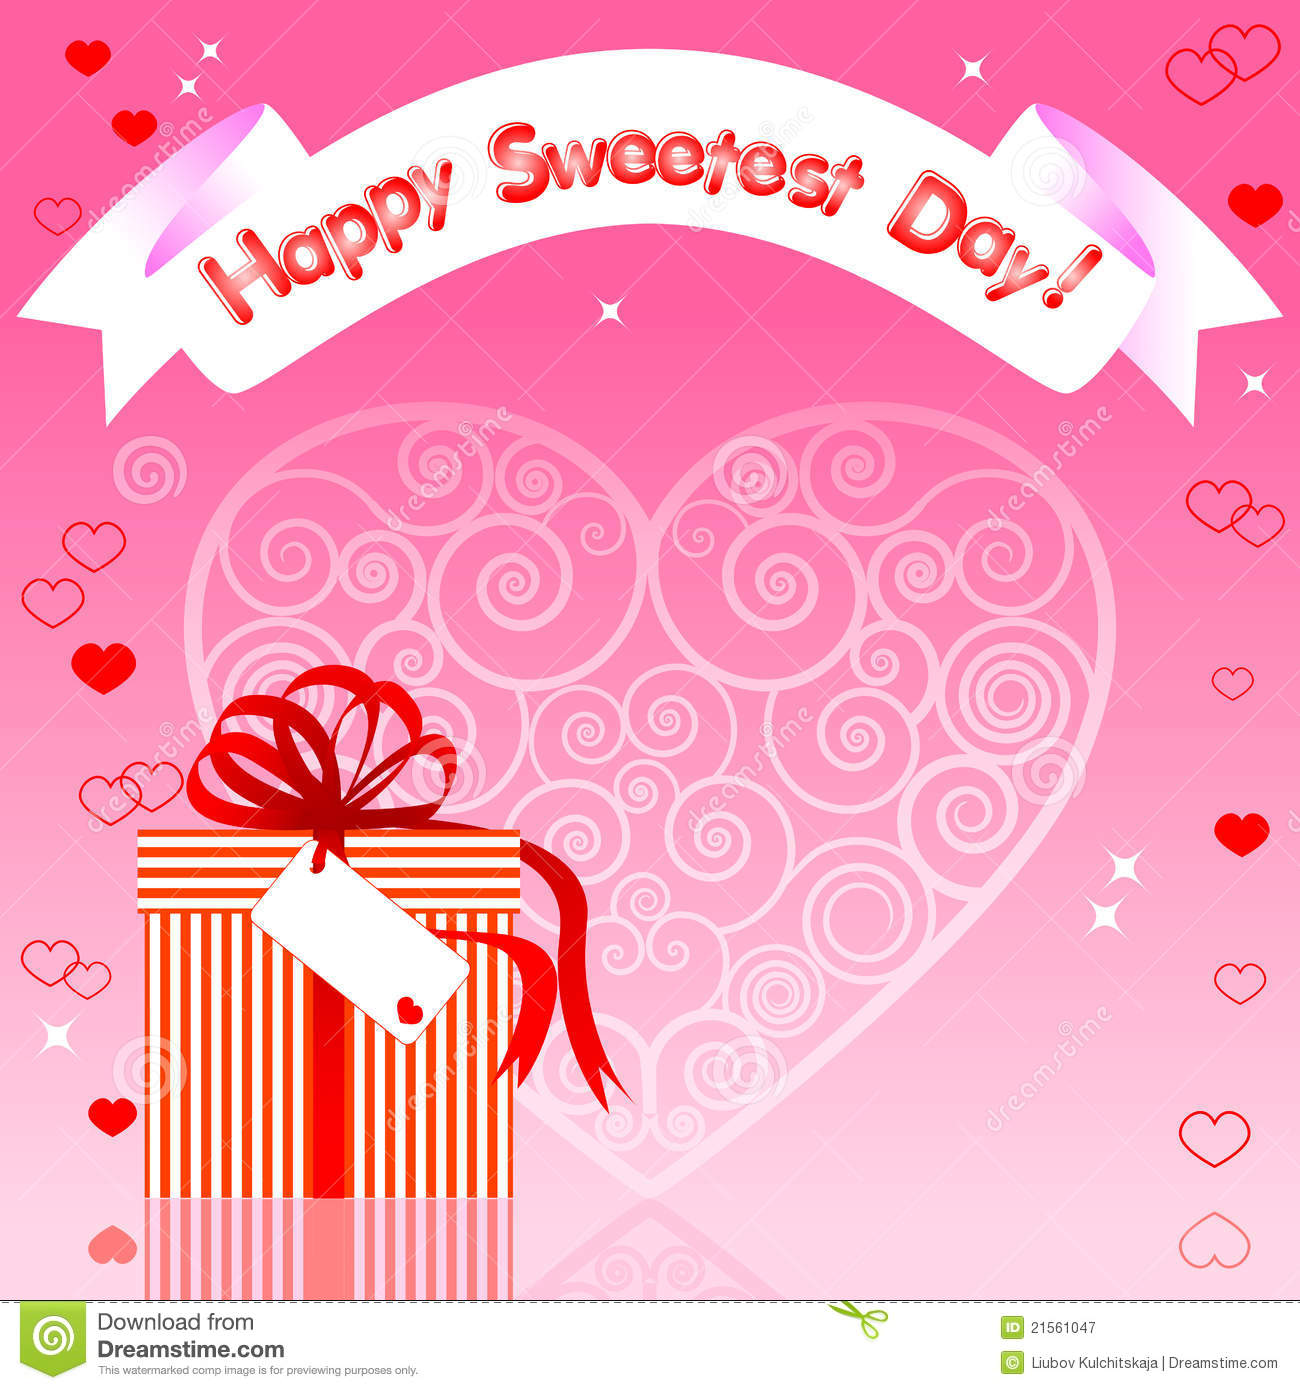 Sweetest Day Card  Royalty Free Stock Photography   Image  21561047